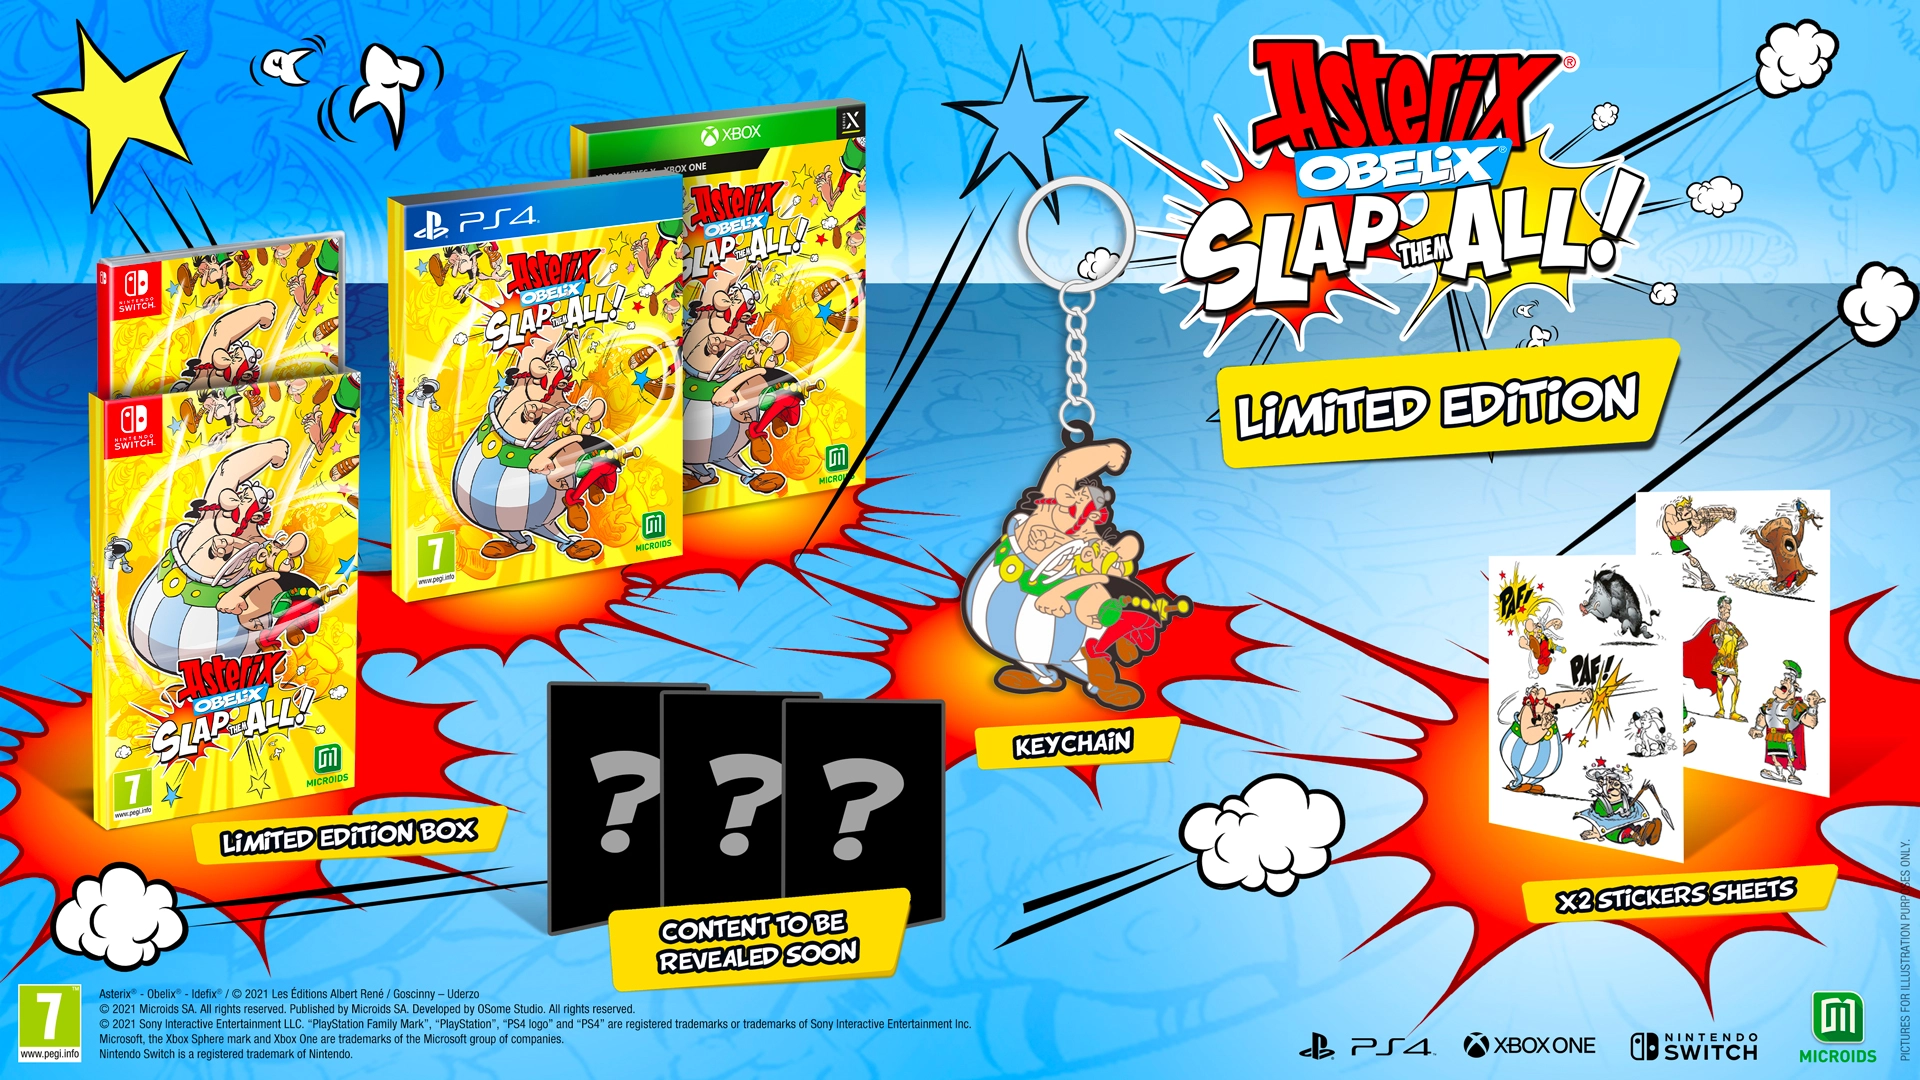 Asterix & Obelix: Slap Them All! - Limited Edition (Switch), Microids